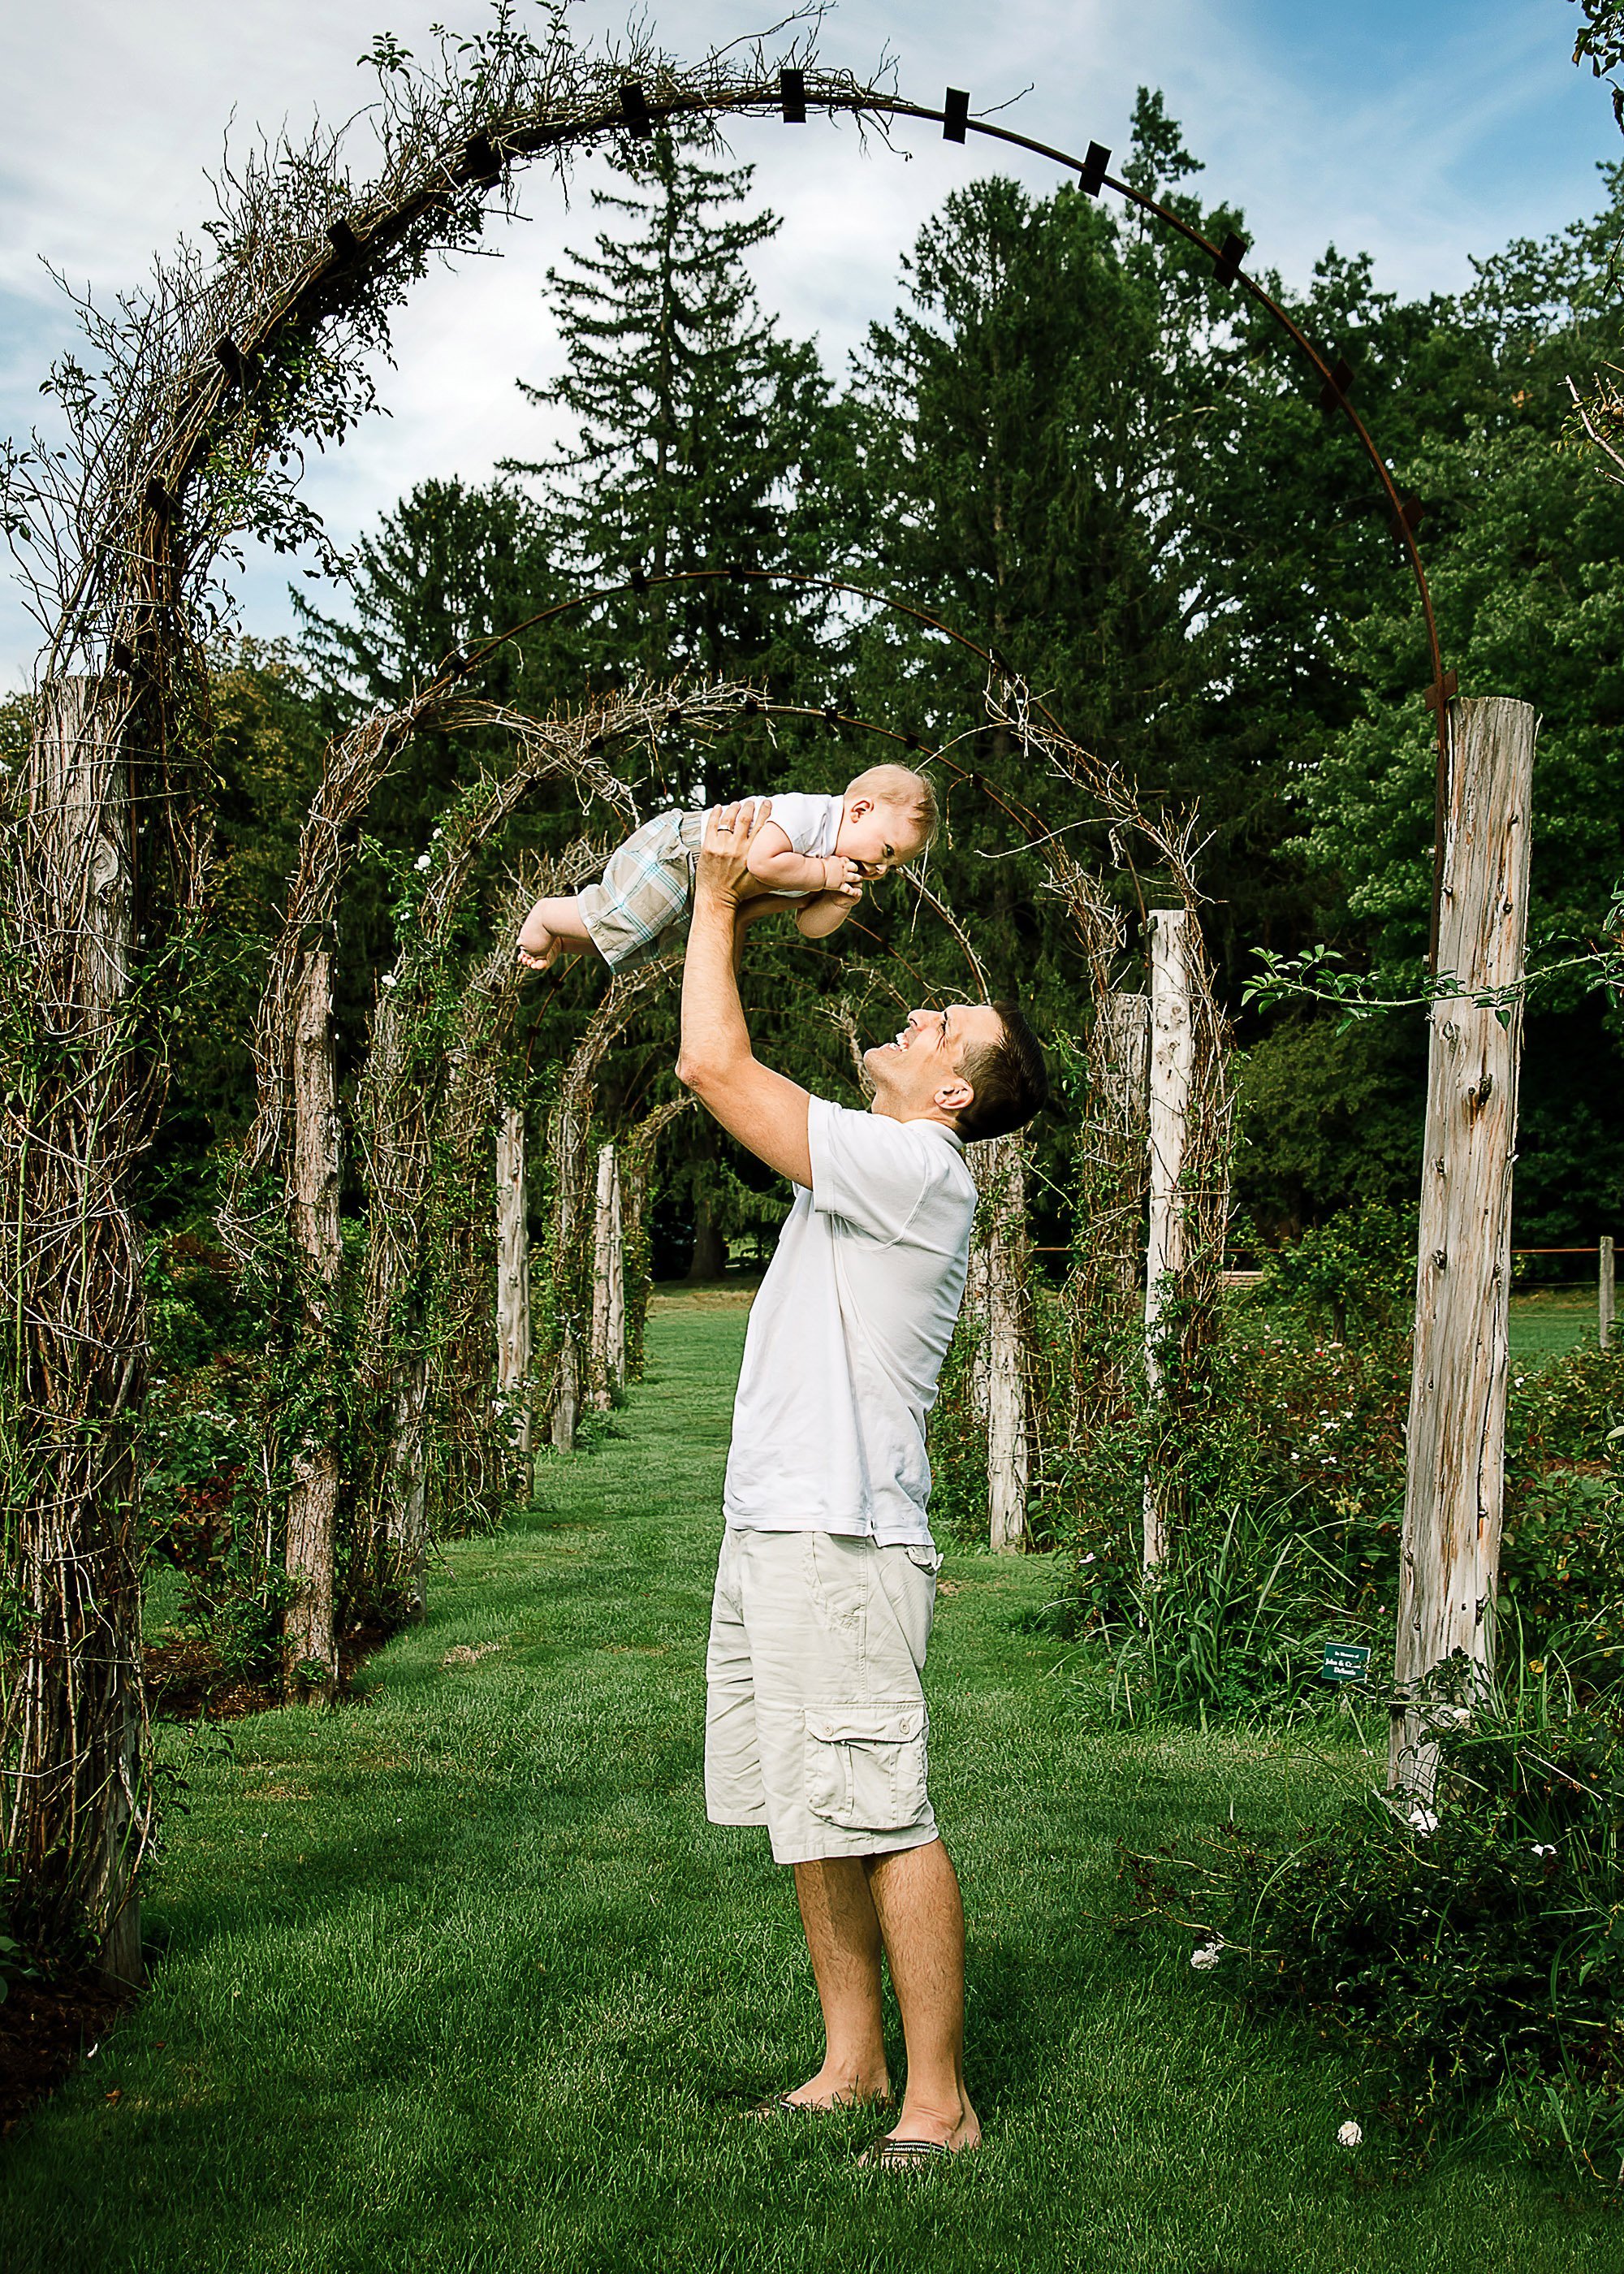 Daddy holds his 6 month old son above his head in a garden underneath arches